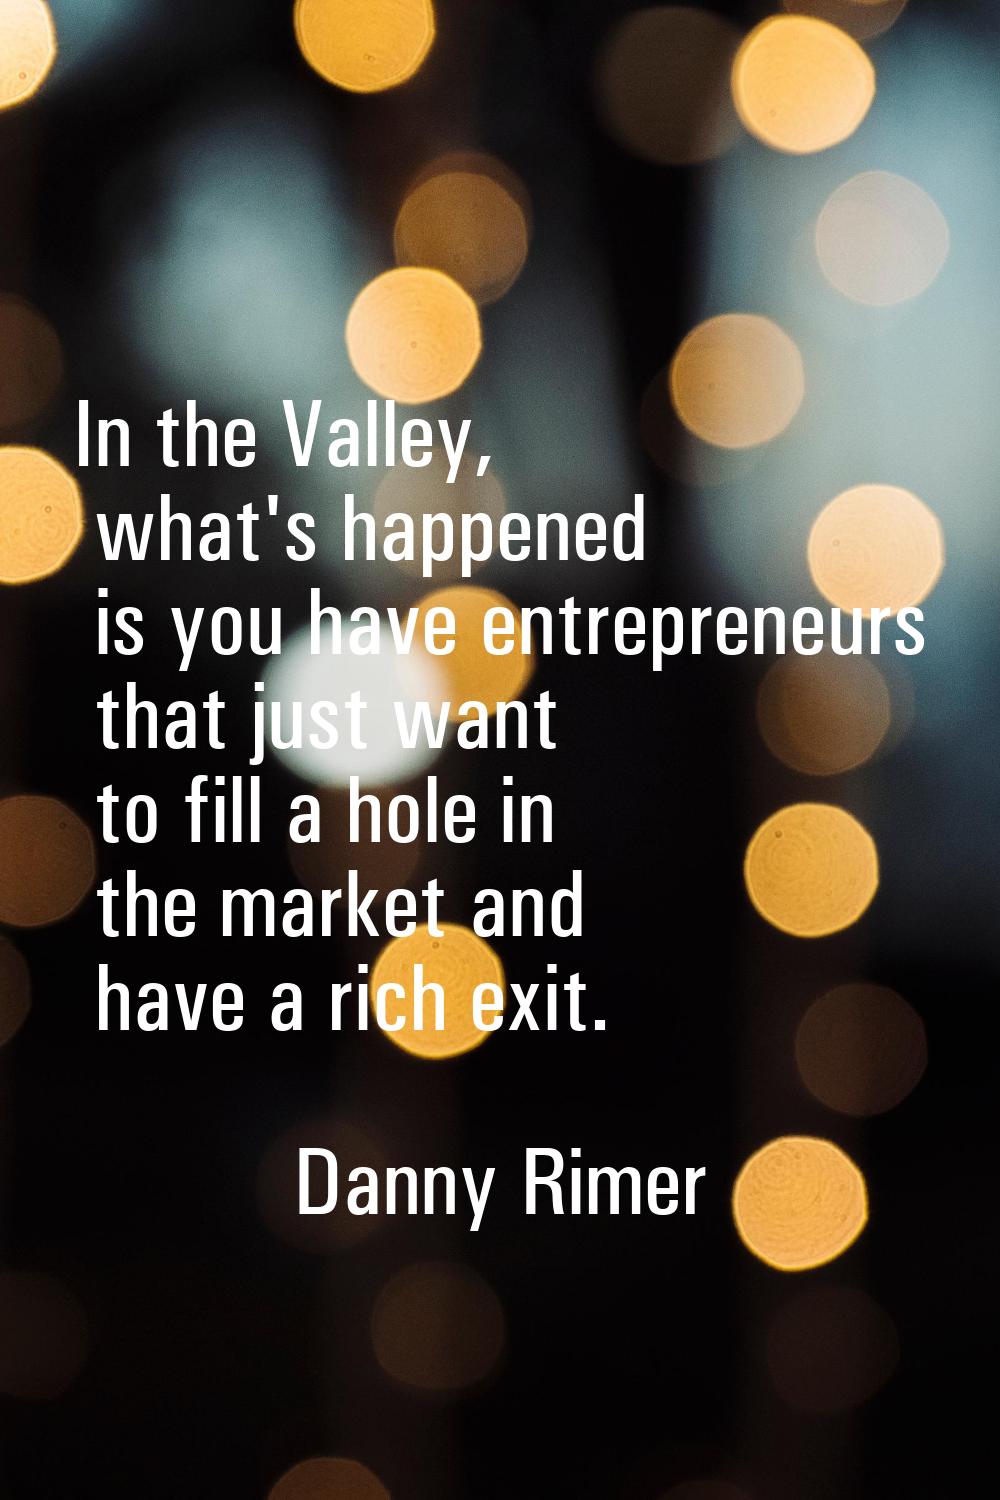 In the Valley, what's happened is you have entrepreneurs that just want to fill a hole in the marke